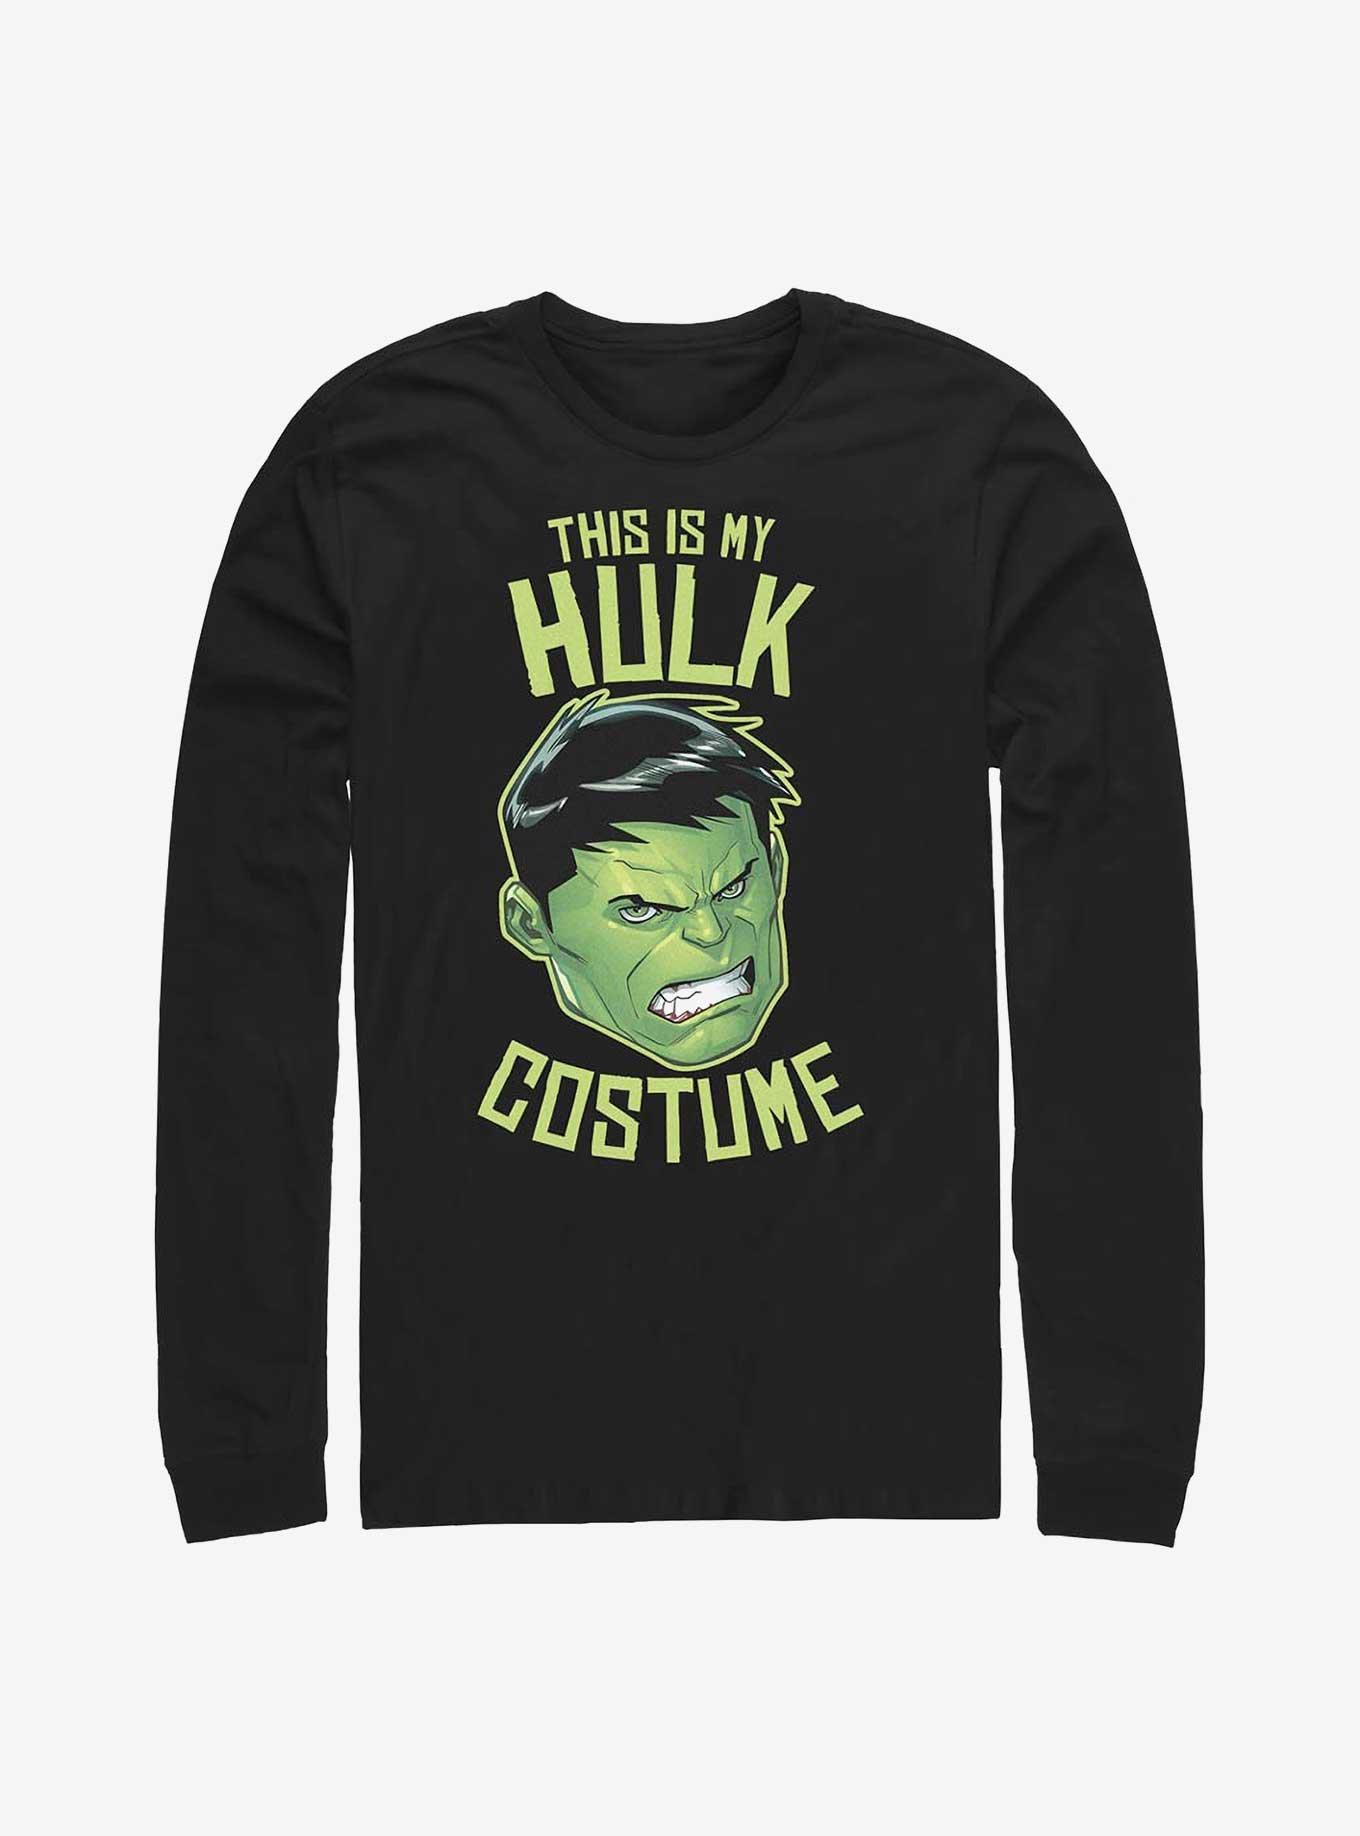 Marvel The Hulk This Is My Costume Long-Sleeve T-Shirt, BLACK, hi-res